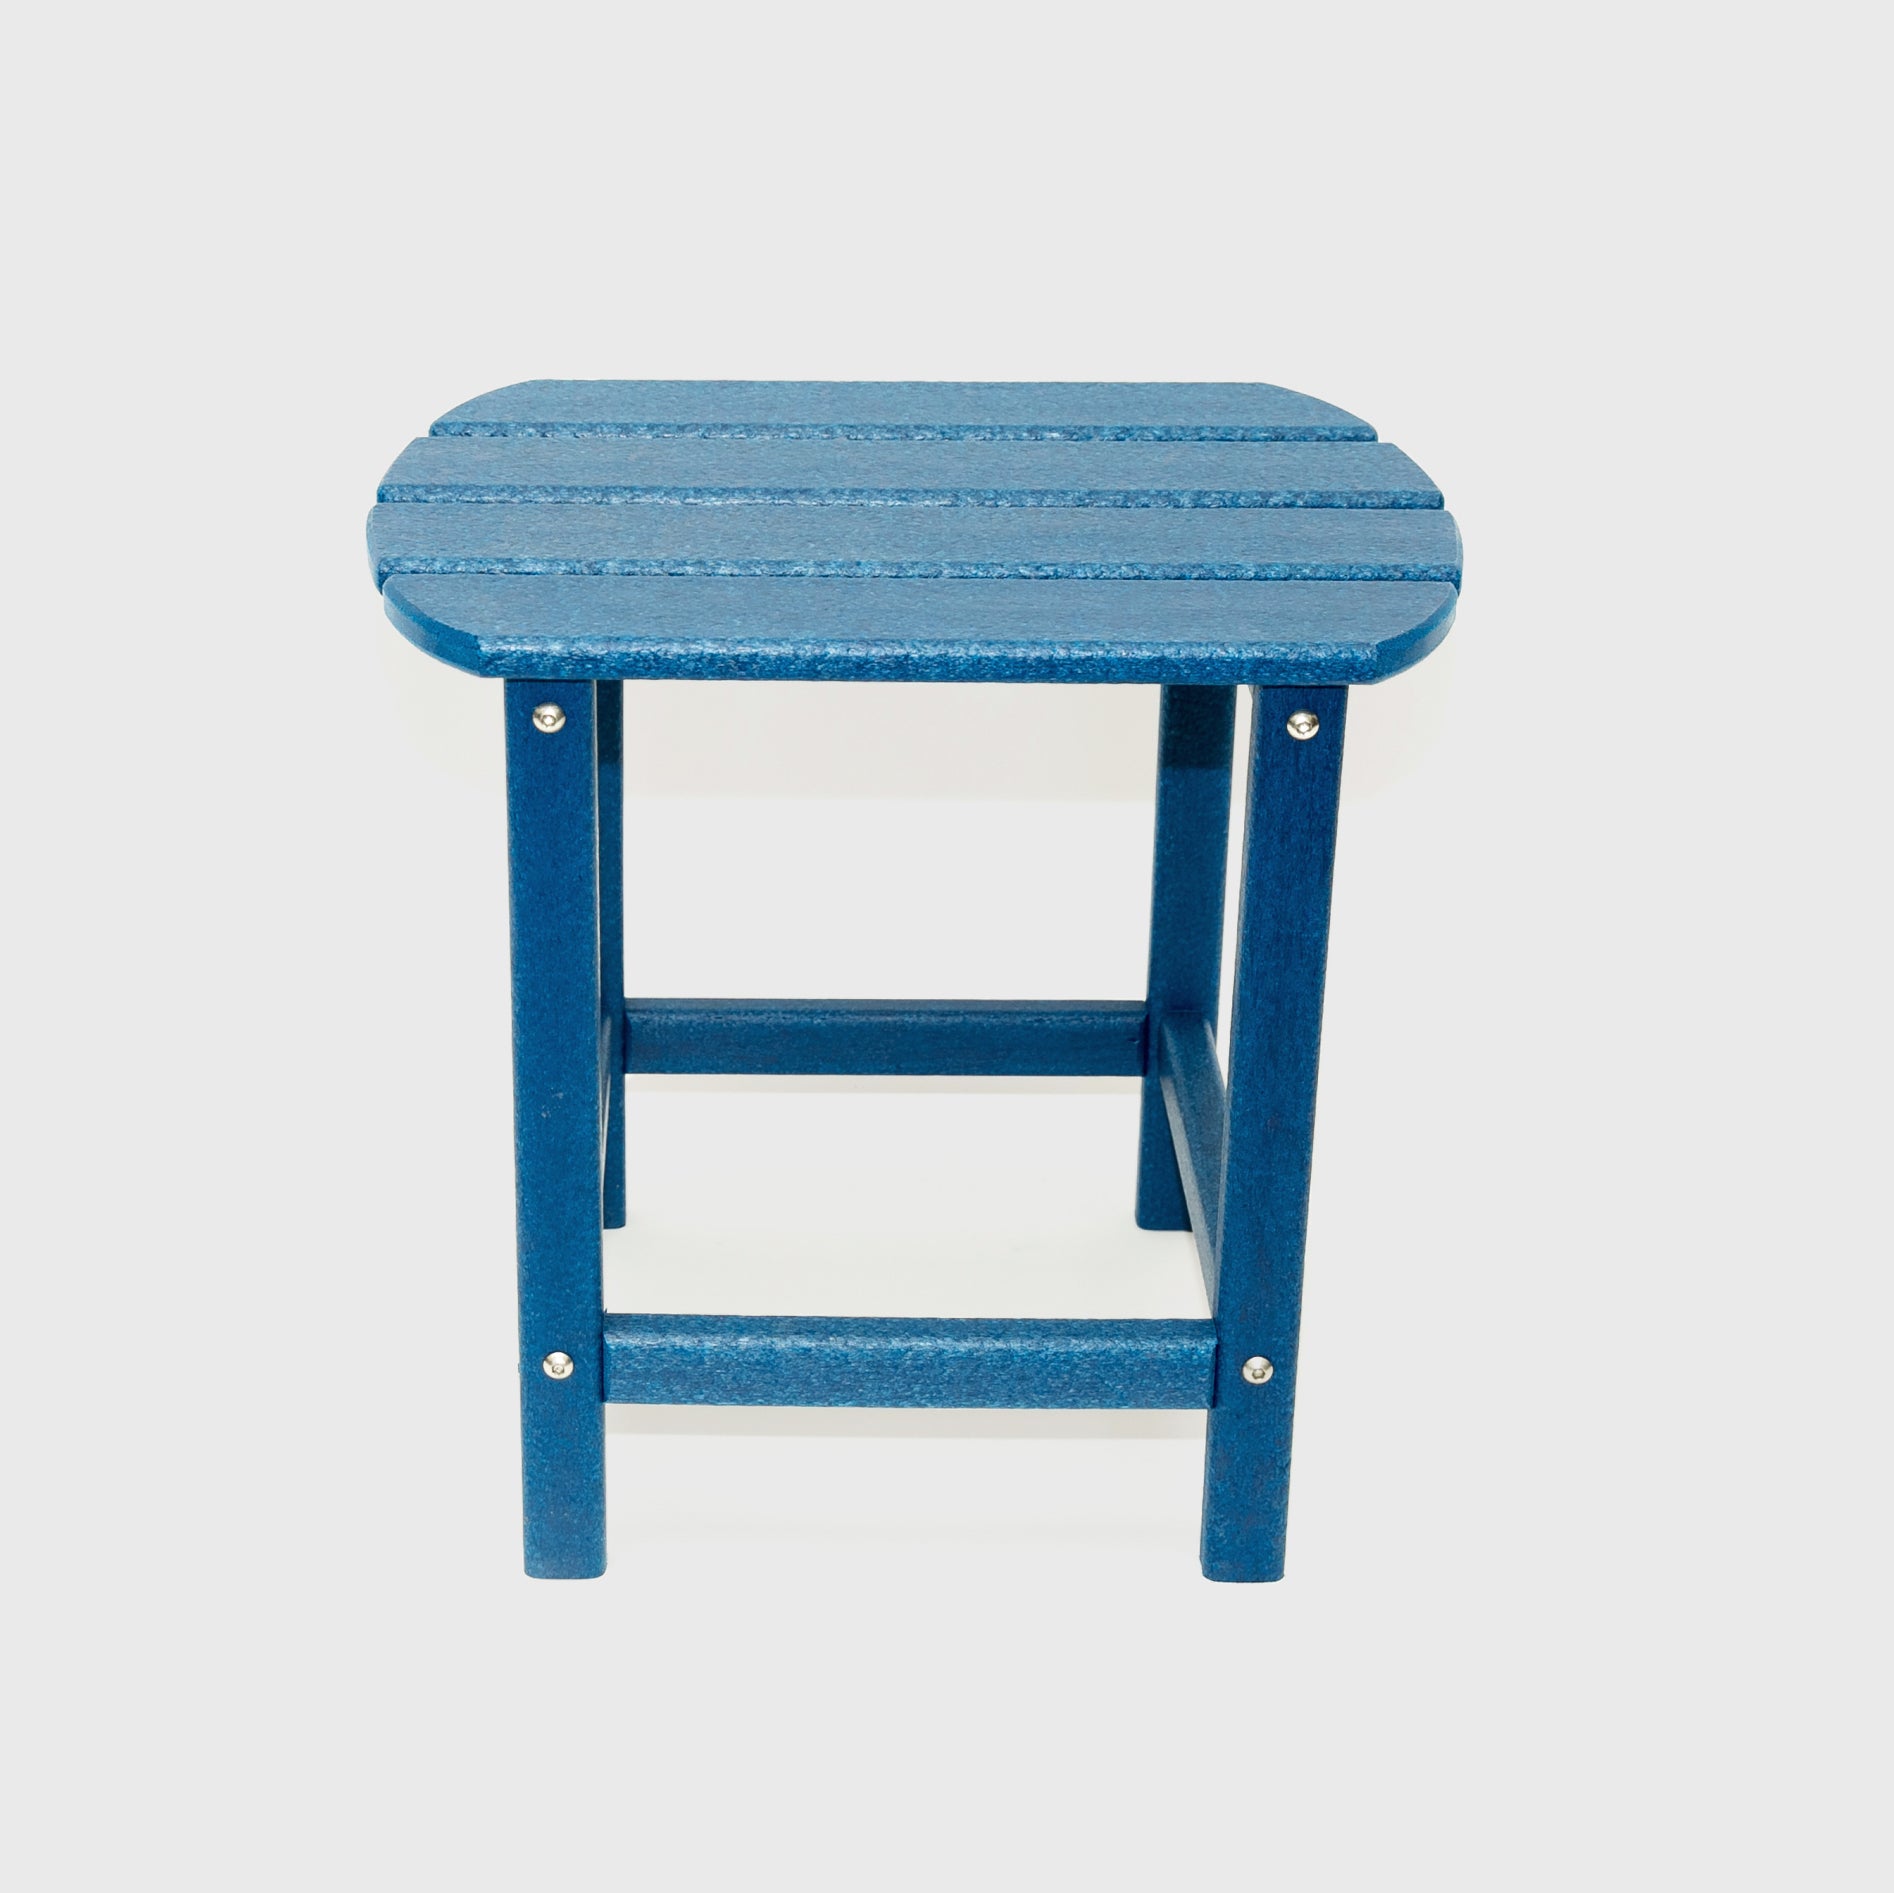 LuXeo Corona 18" HDPE Recycled Plastic Side Table